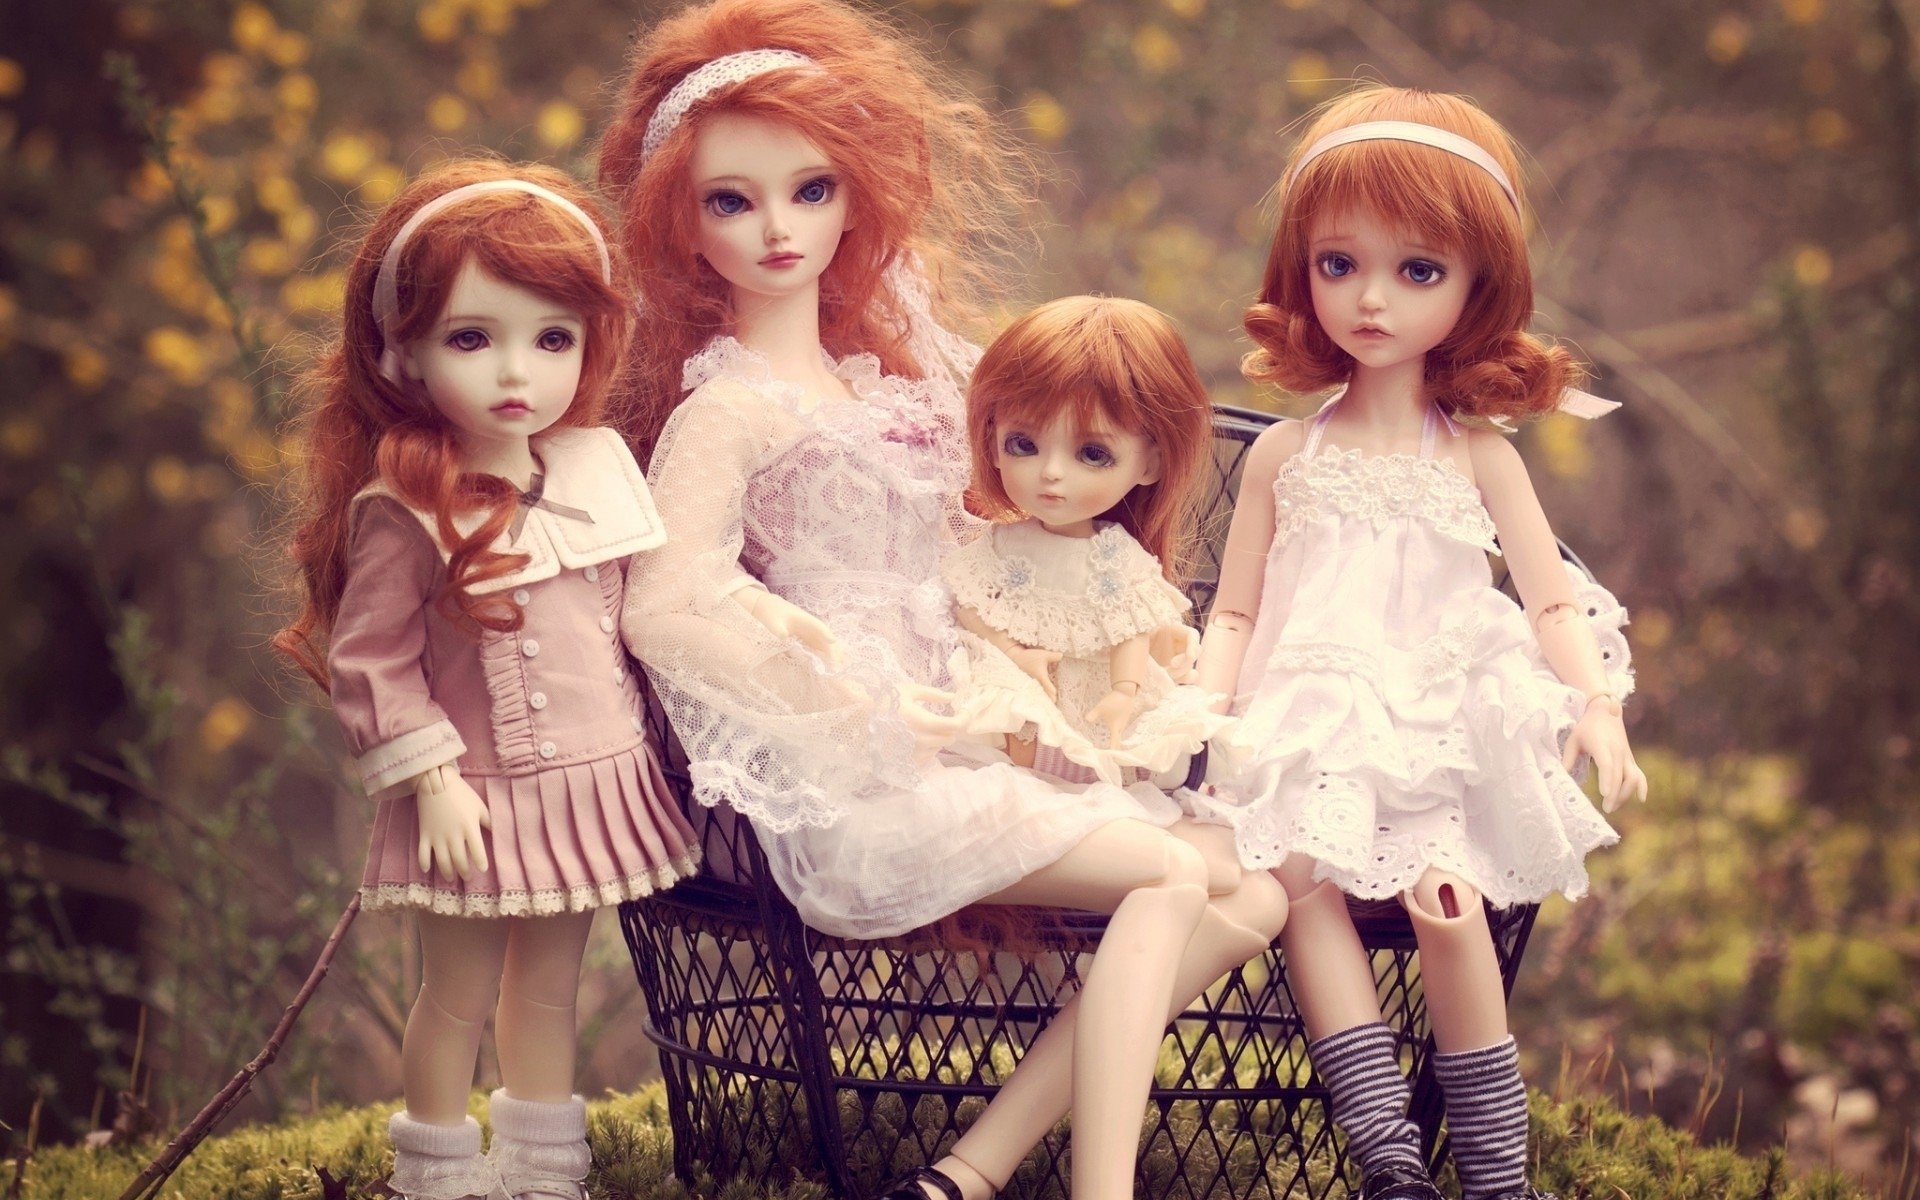 Doll HD wallpaper, Doll background image, High-definition doll wallpapers, Wallpaper picture, 1920x1200 HD Desktop